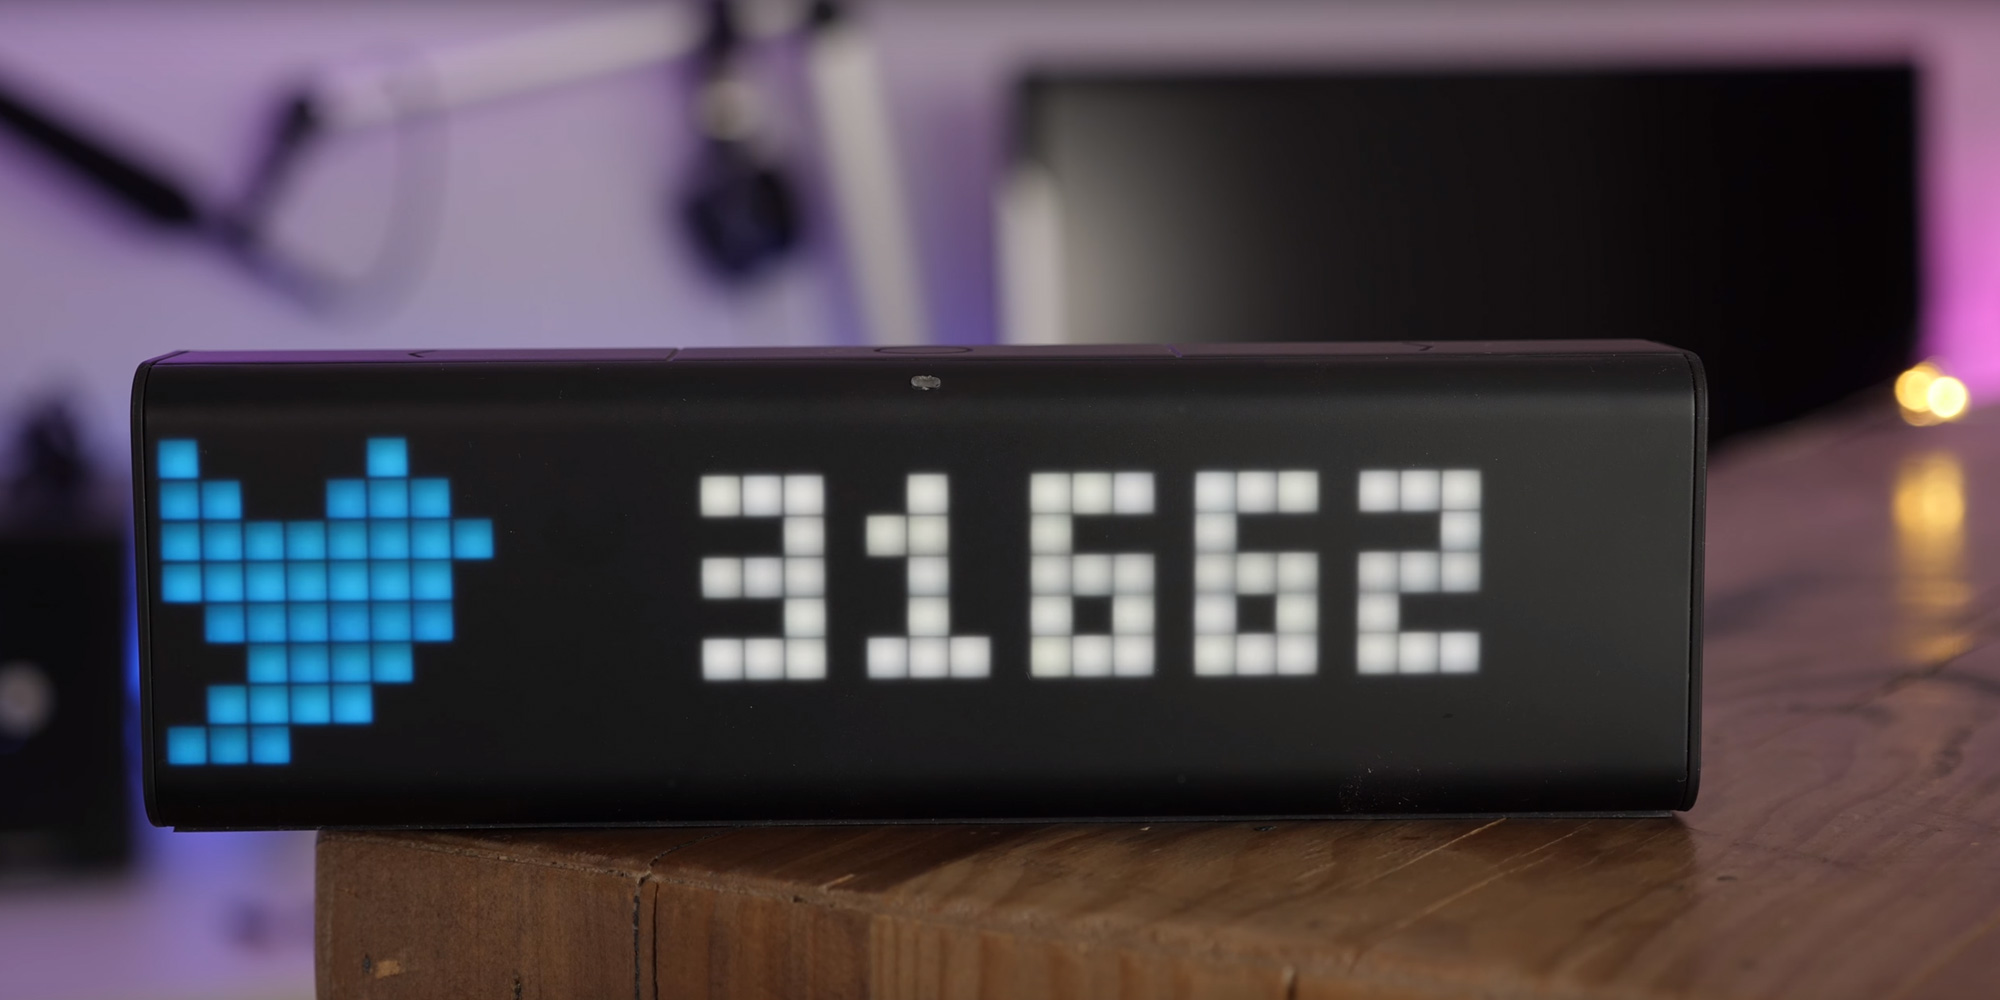 The LaMetric Time Wi-Fi Clock notifies you of weather, tweets, more for  $150 (Reg. $200)